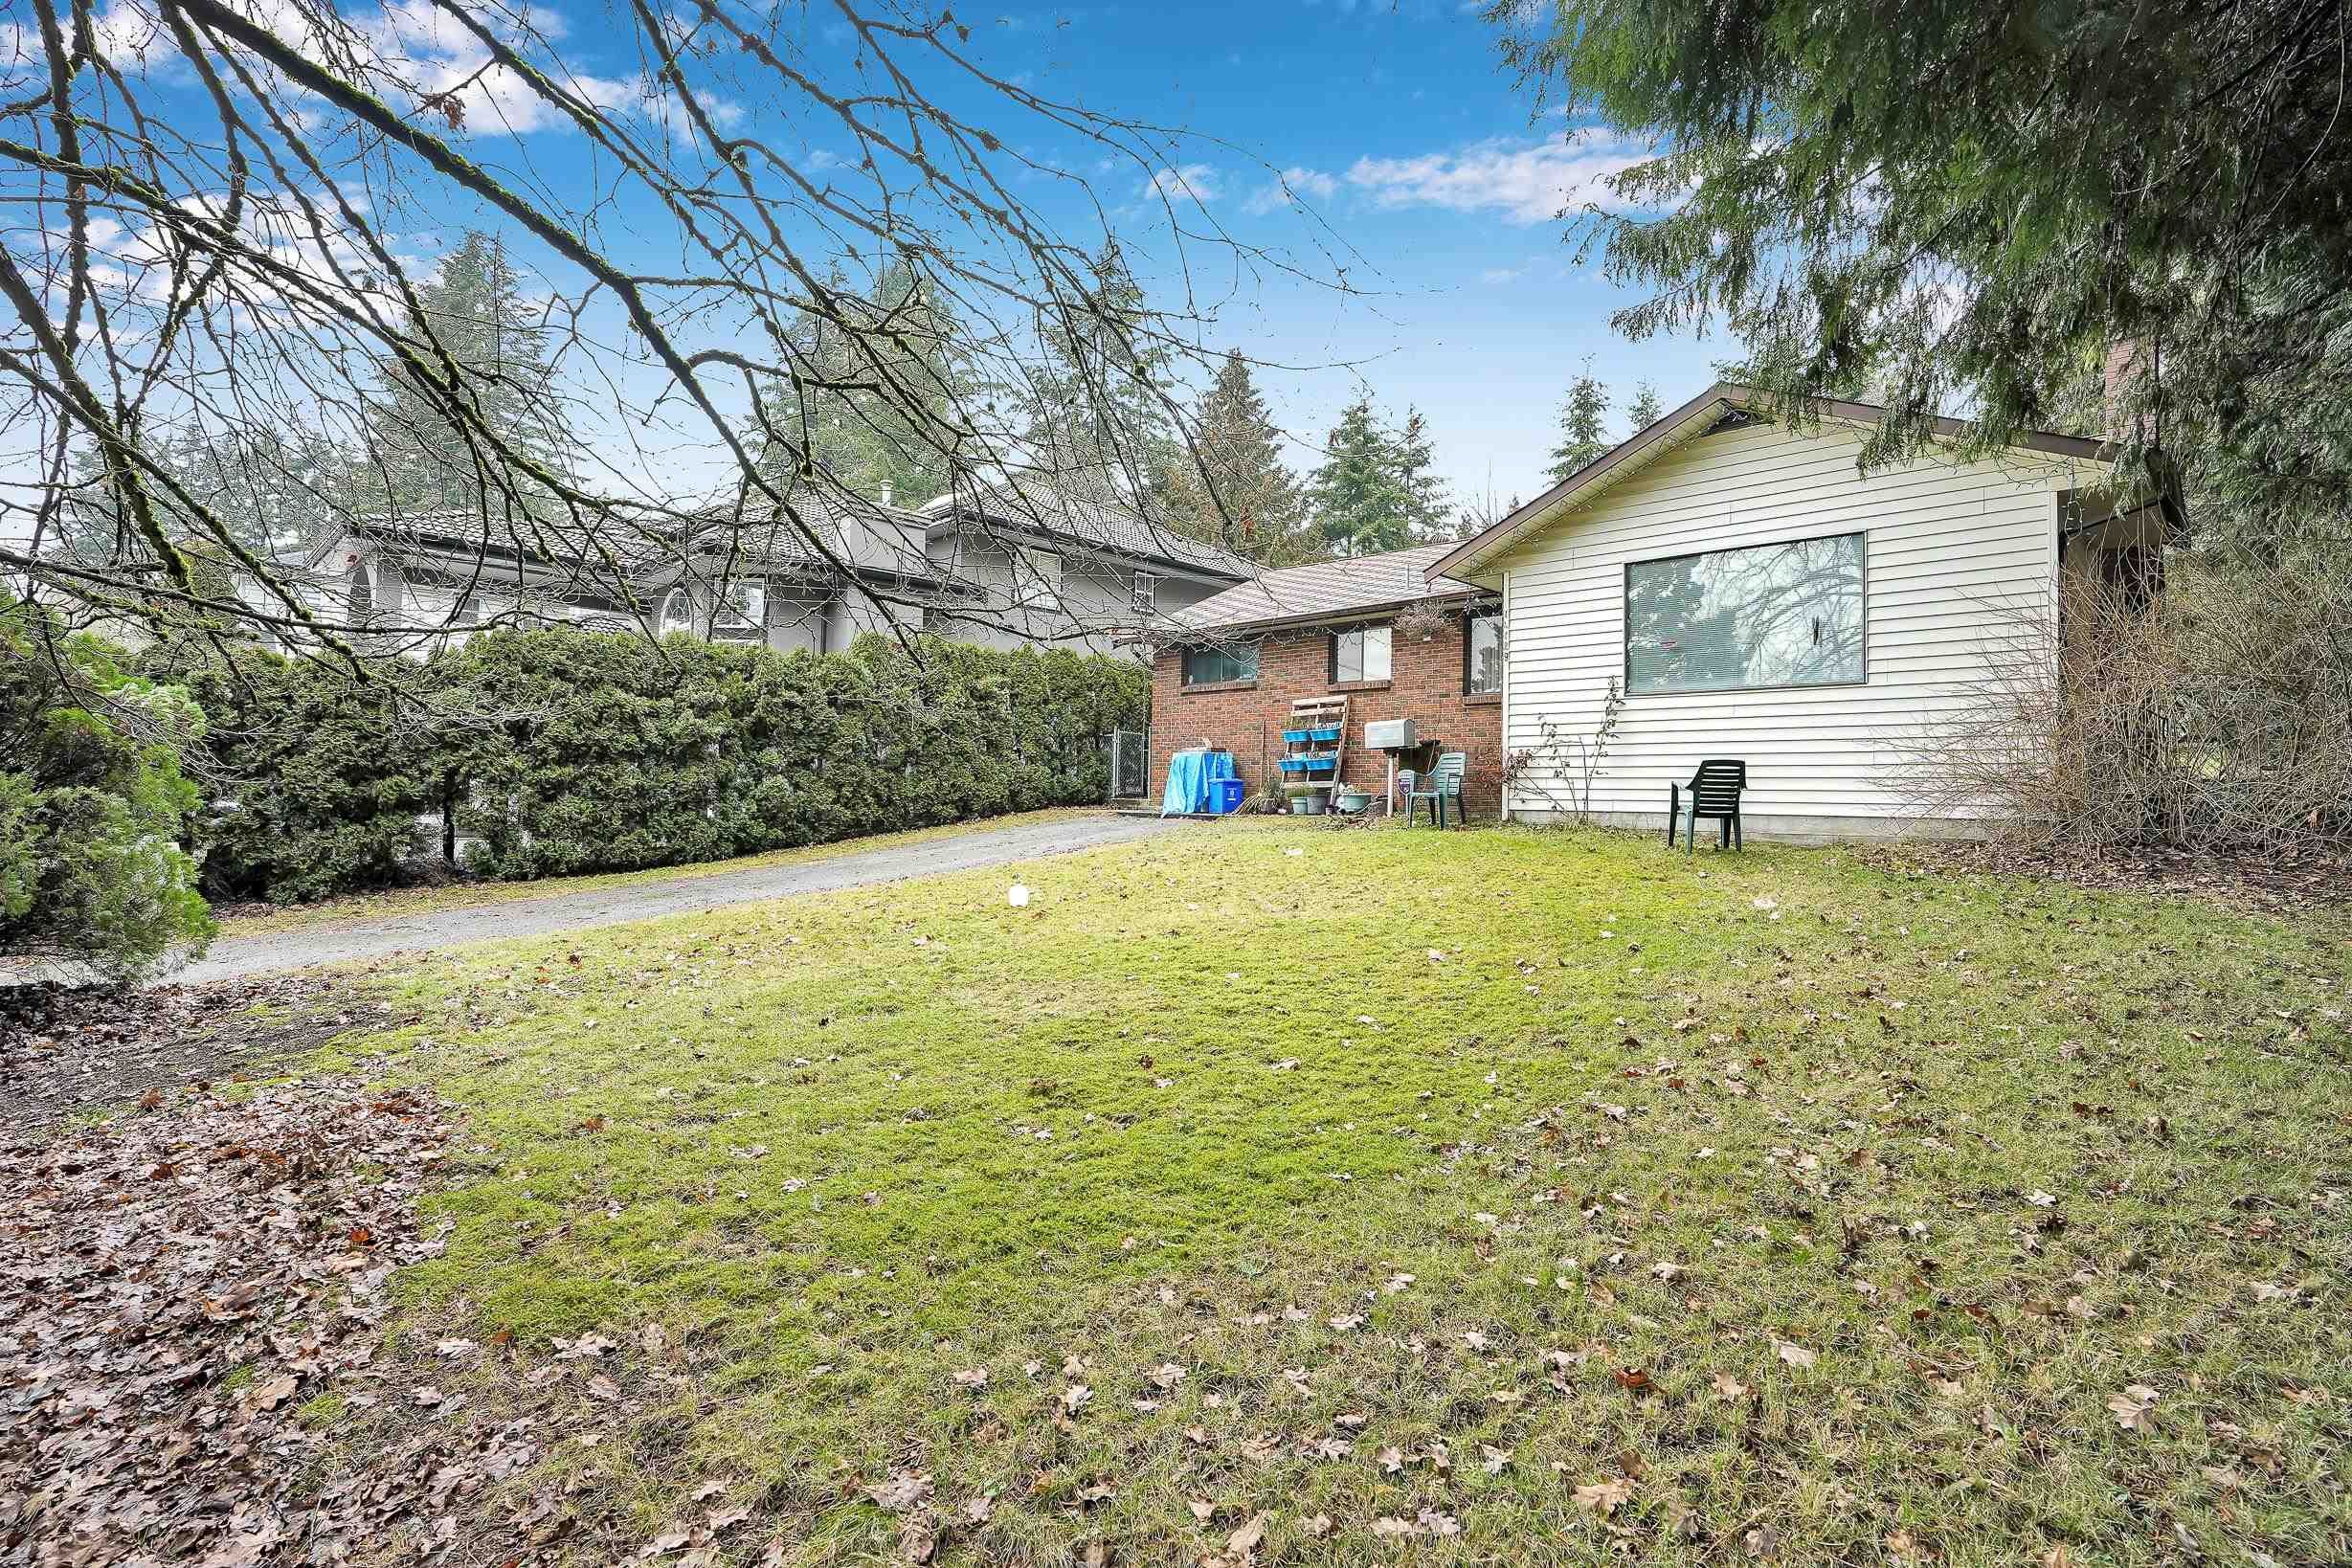 I have sold a property at 14129 68 AVE in Surrey
